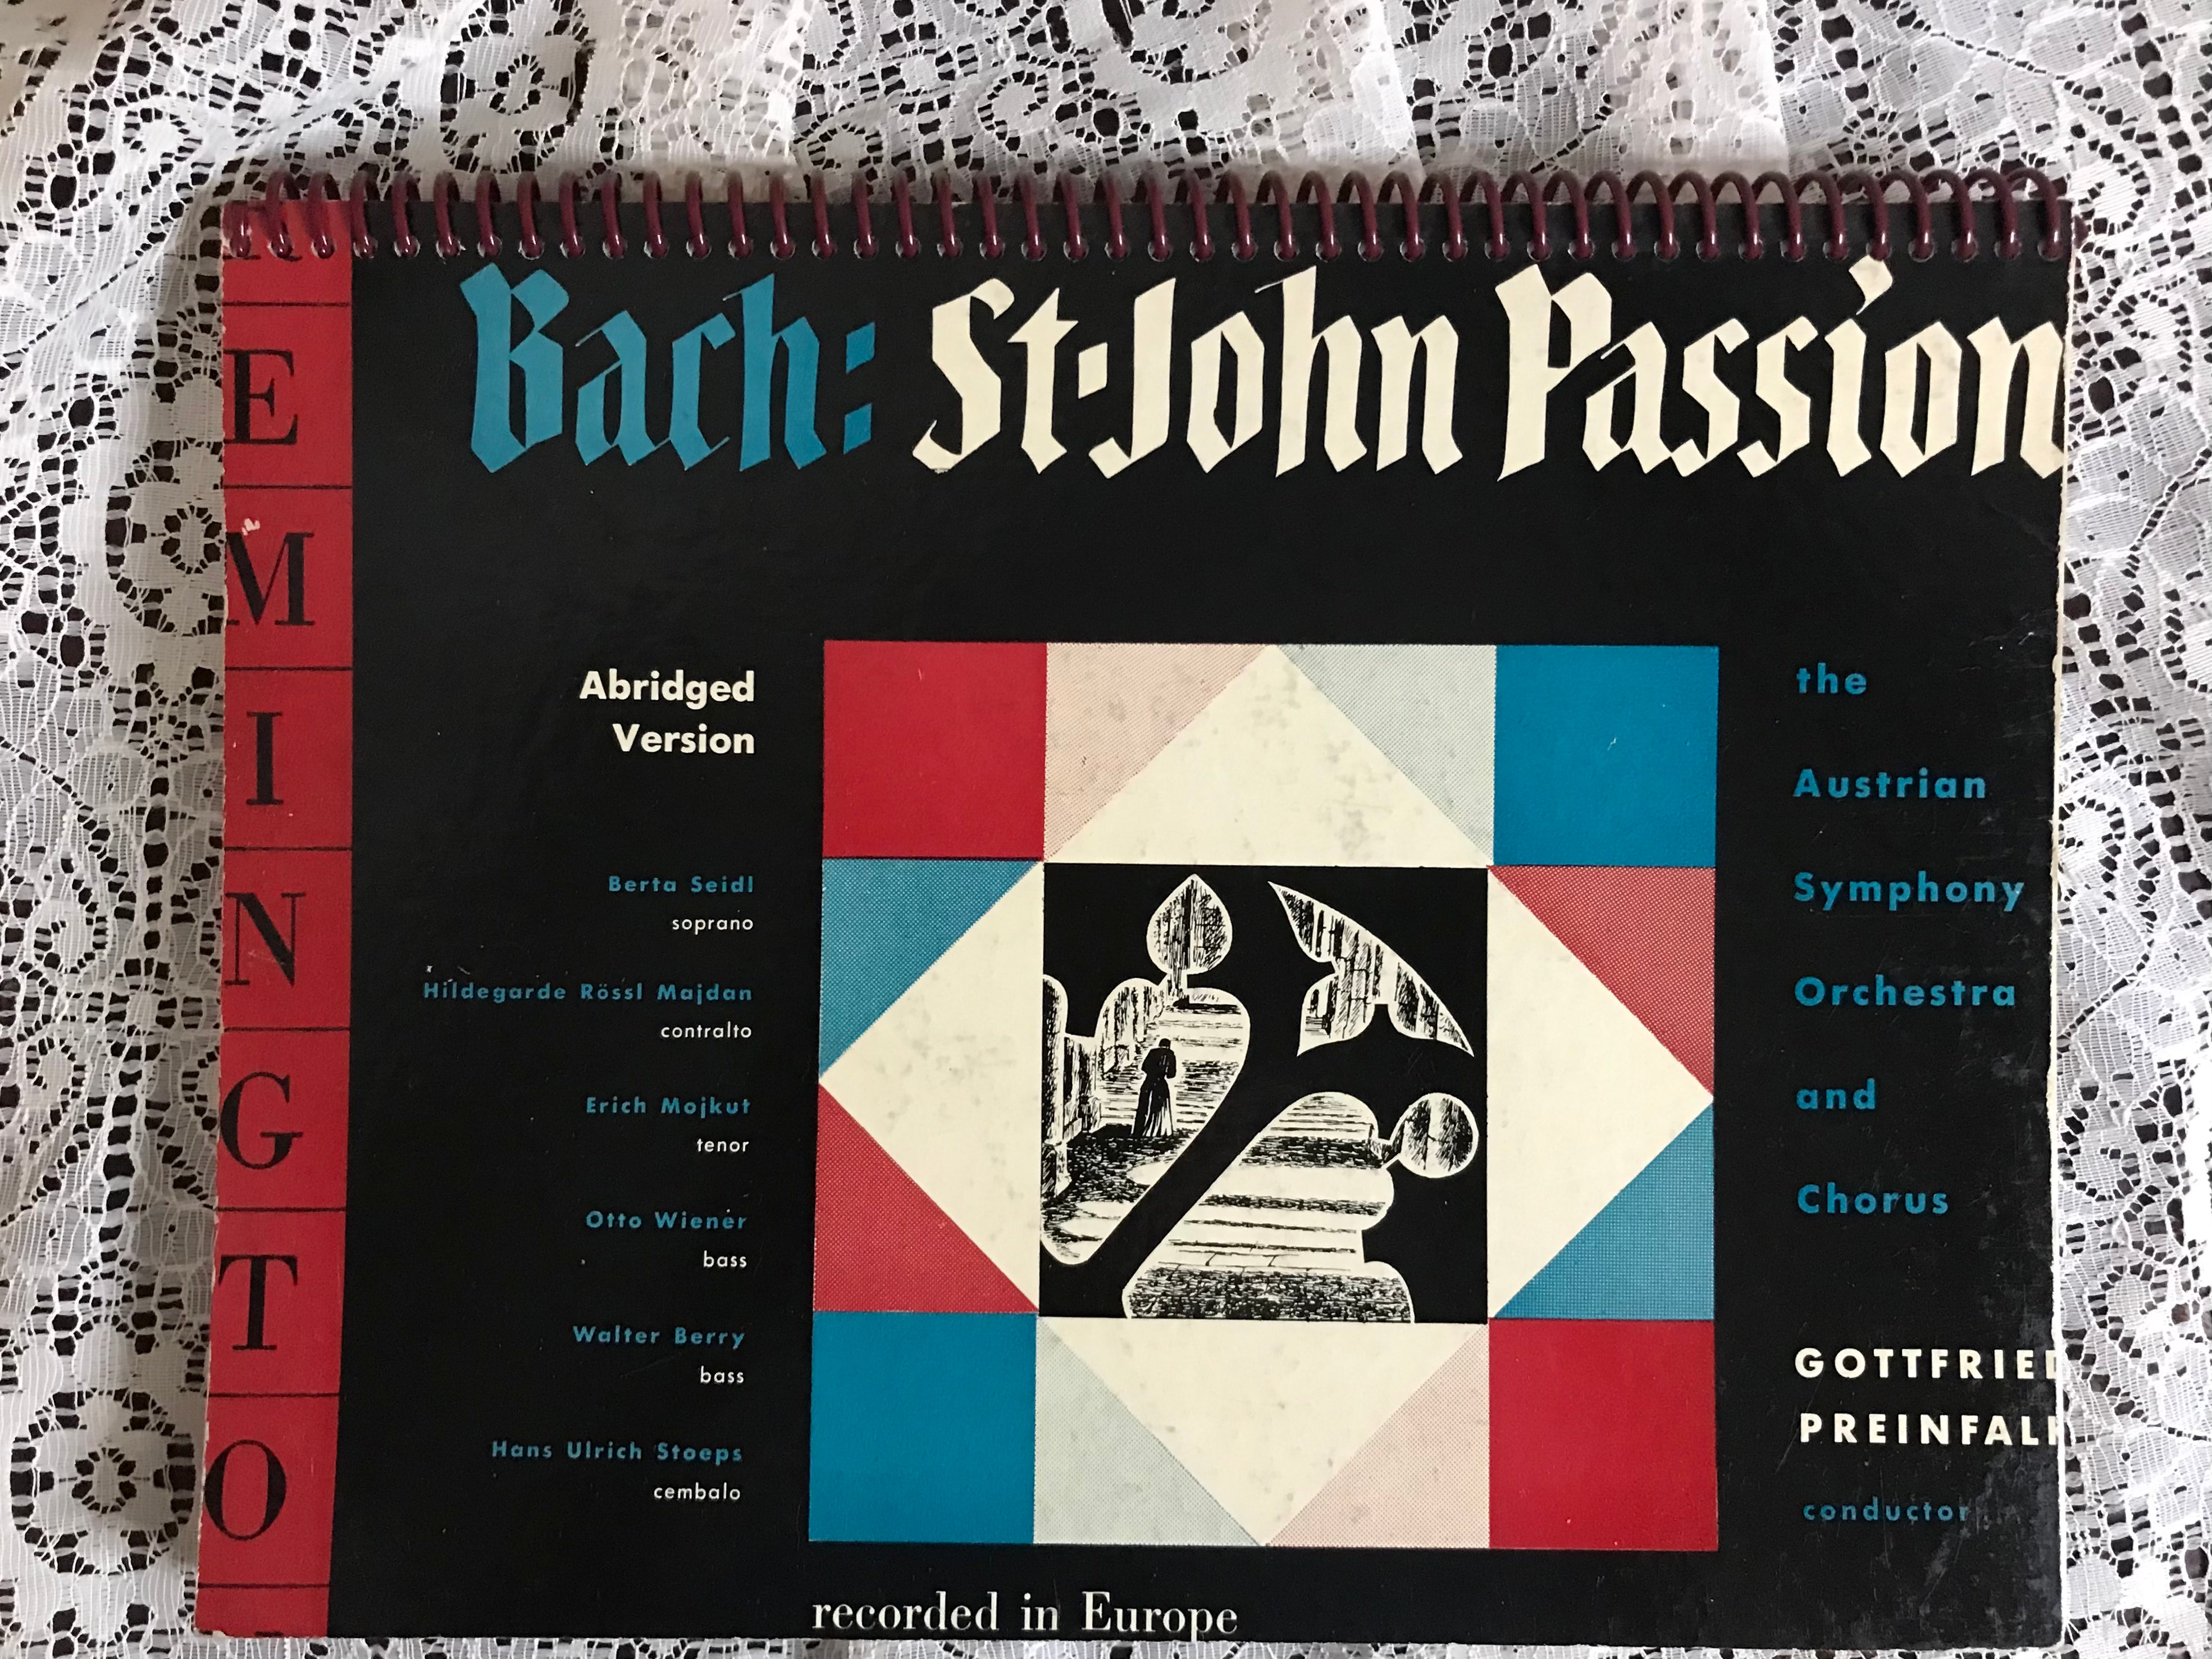 Bach / St. John Passion Album Cover Notebook